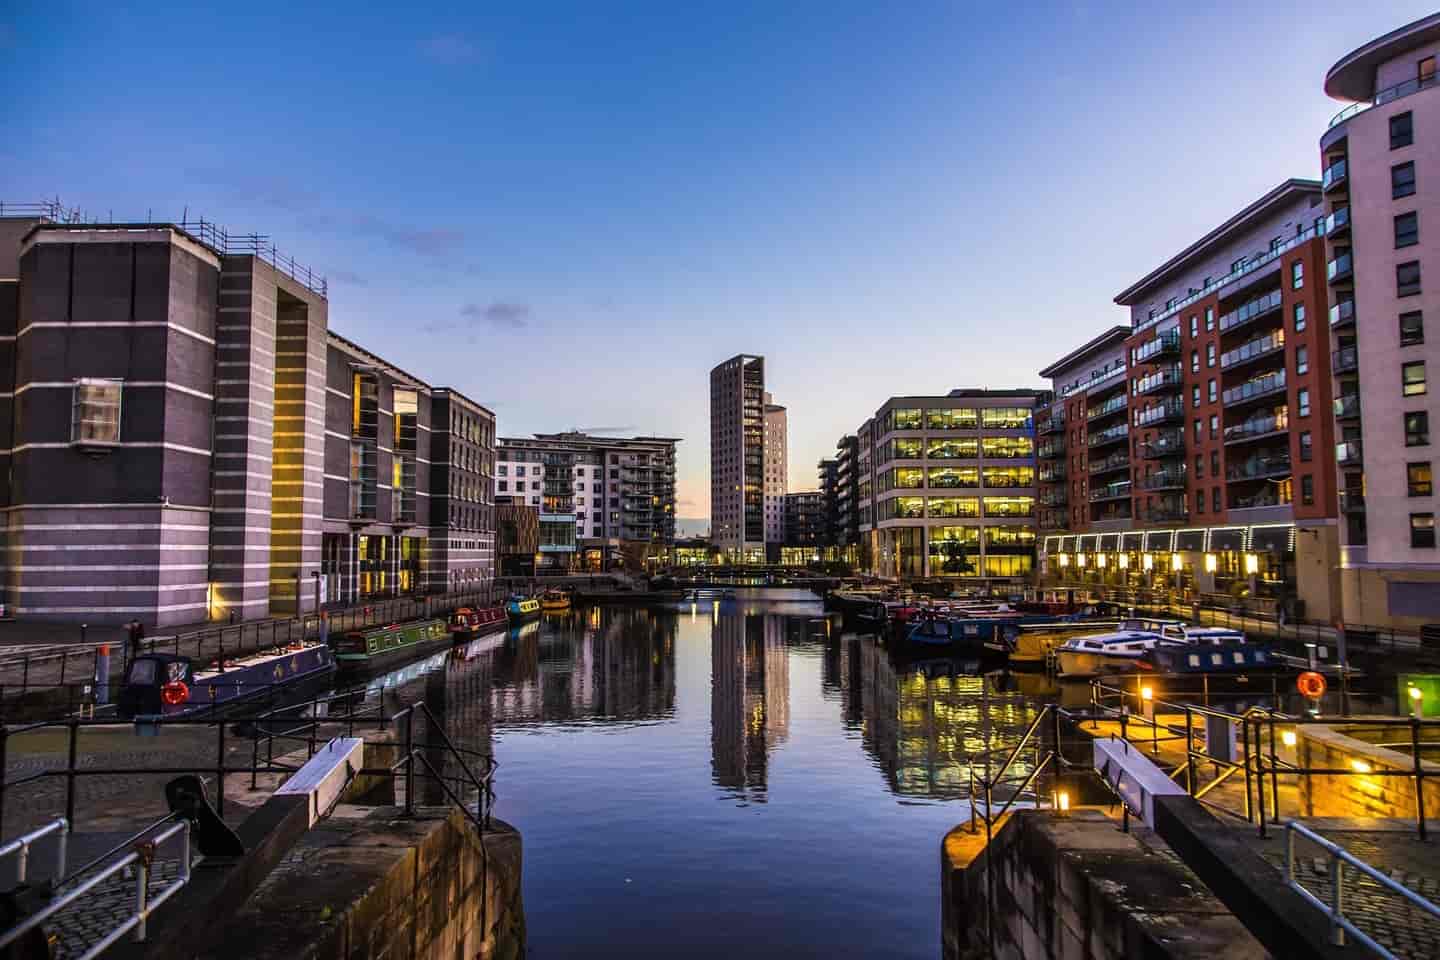 Student Accommodation in Leeds - City centre apartments near Clarence Dock at night